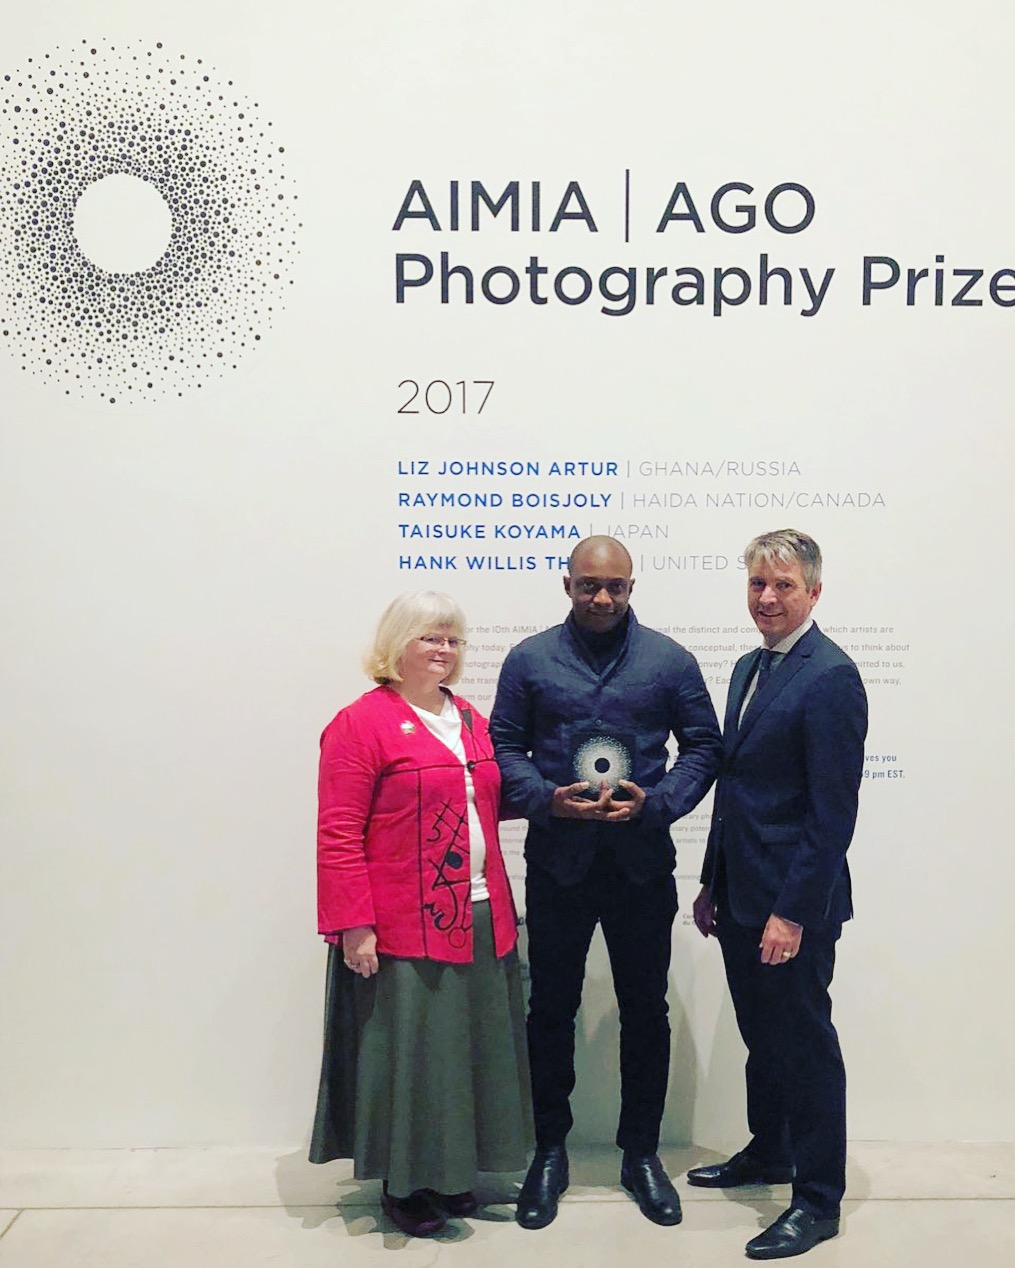 Left to right: Alden Hadwen, Director, Community Engagement and Curator, Aimia; Hank Willis Thomas